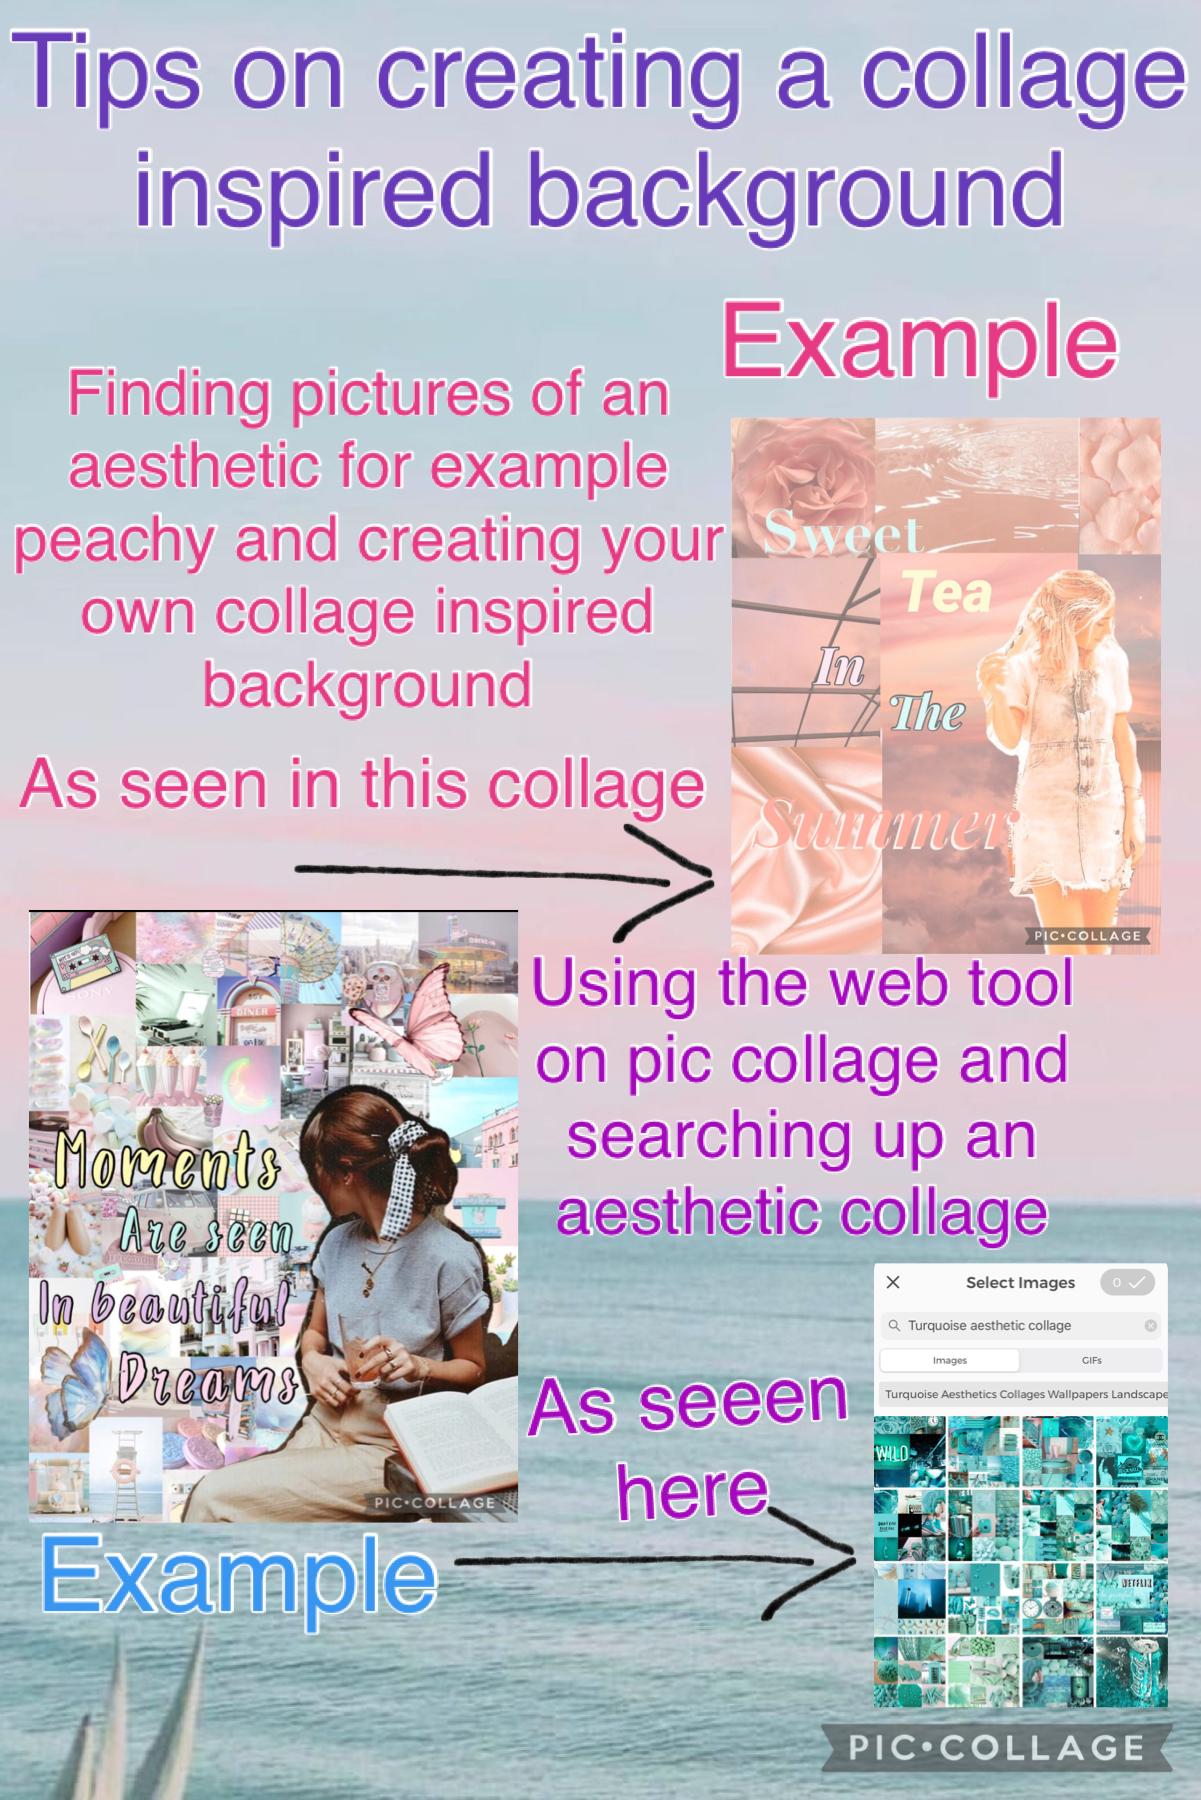 Tips on creating a collage inspired background 28.8.21